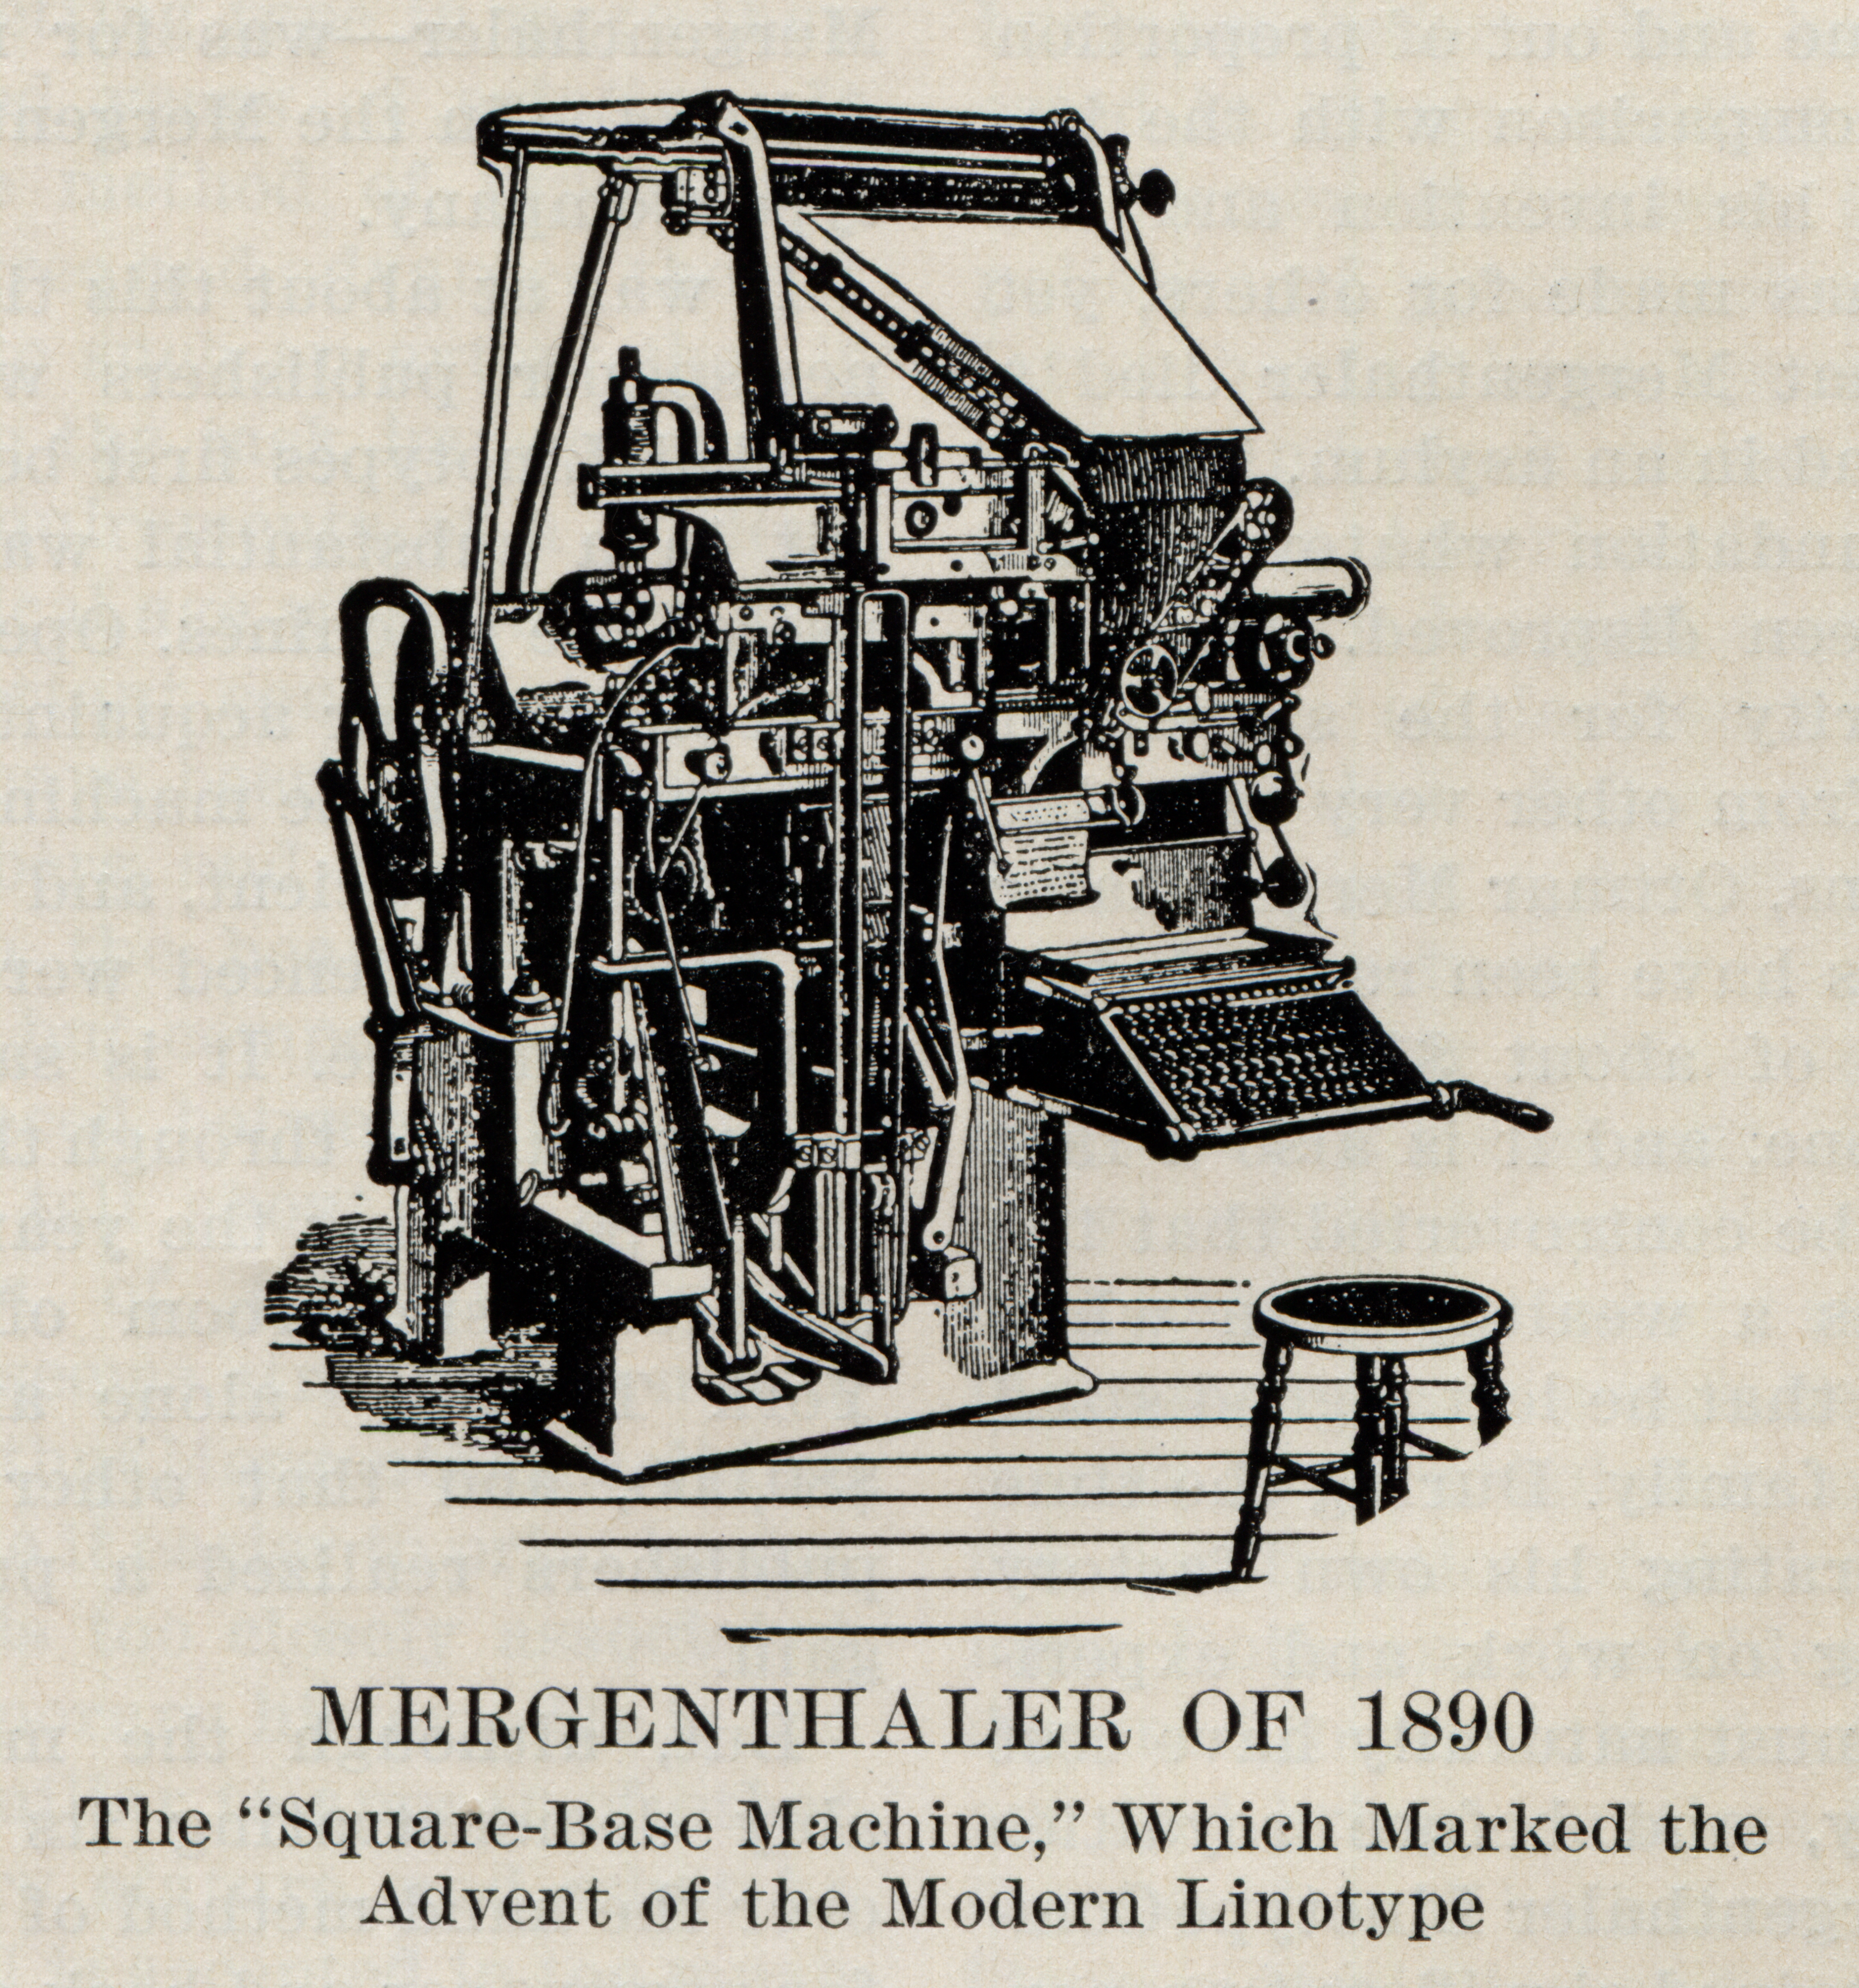 The 'New' Linotype from 1890.